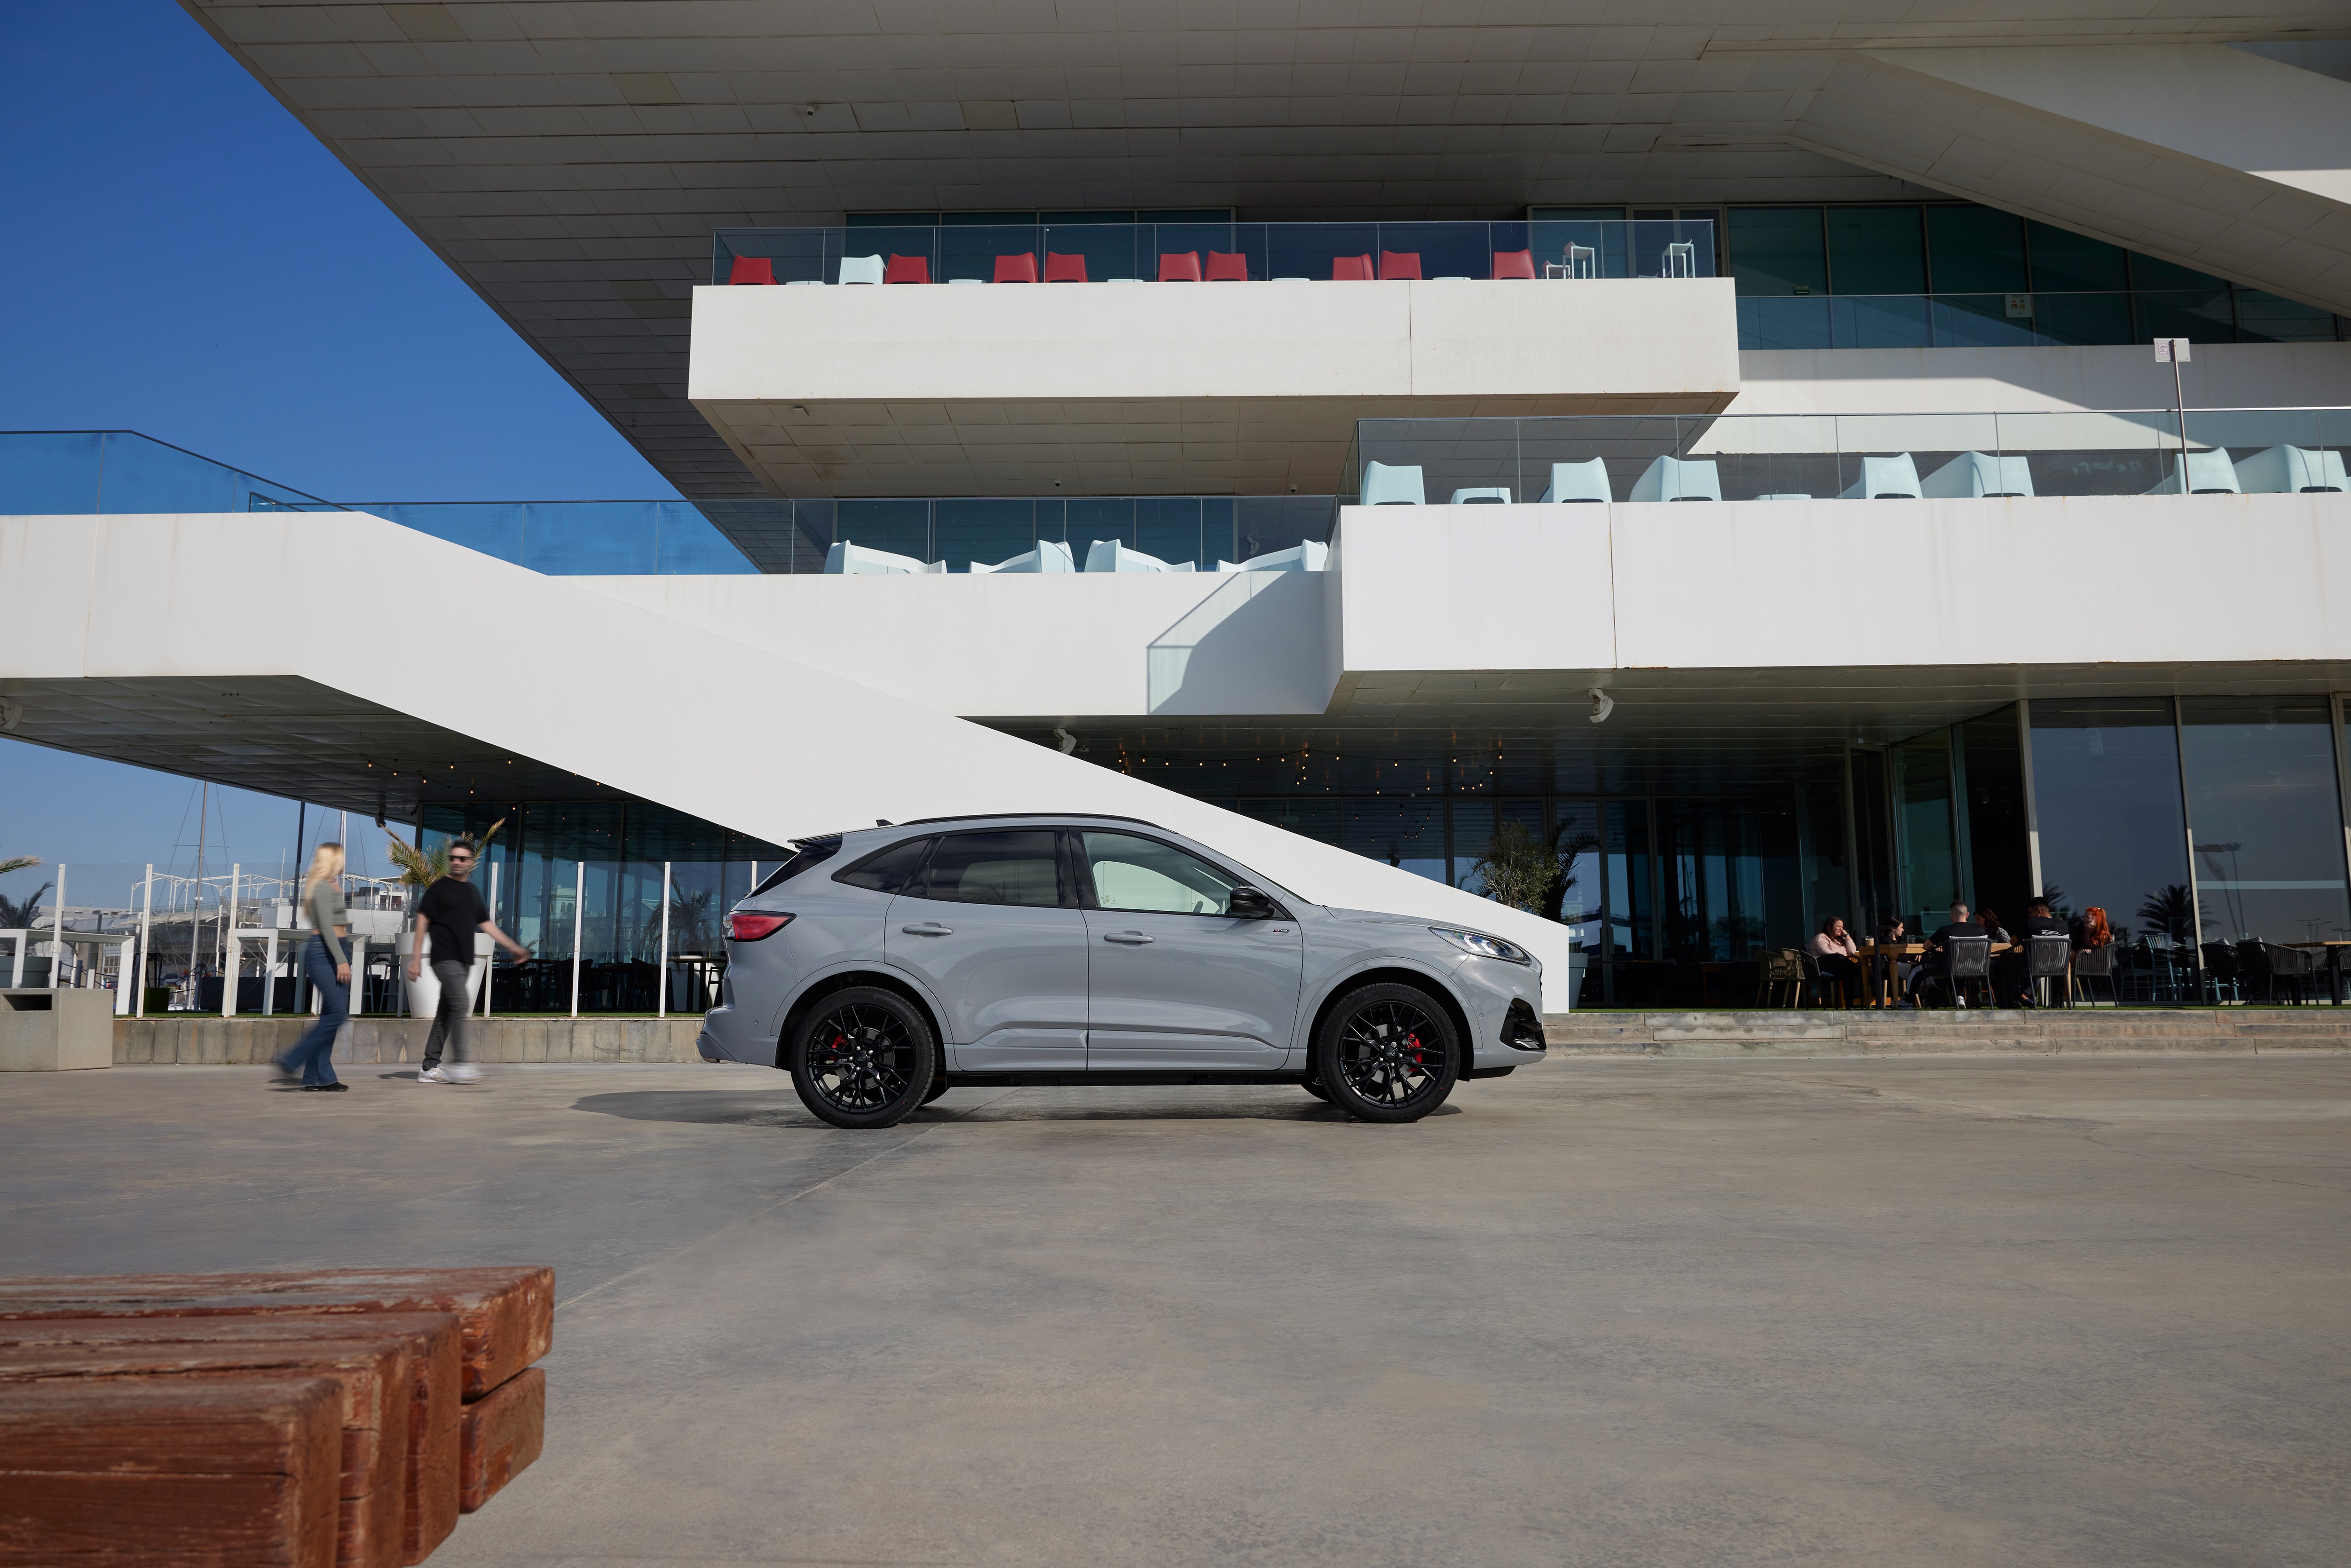 Ford Kuga Graphite Tech Edition Debuts For Europe